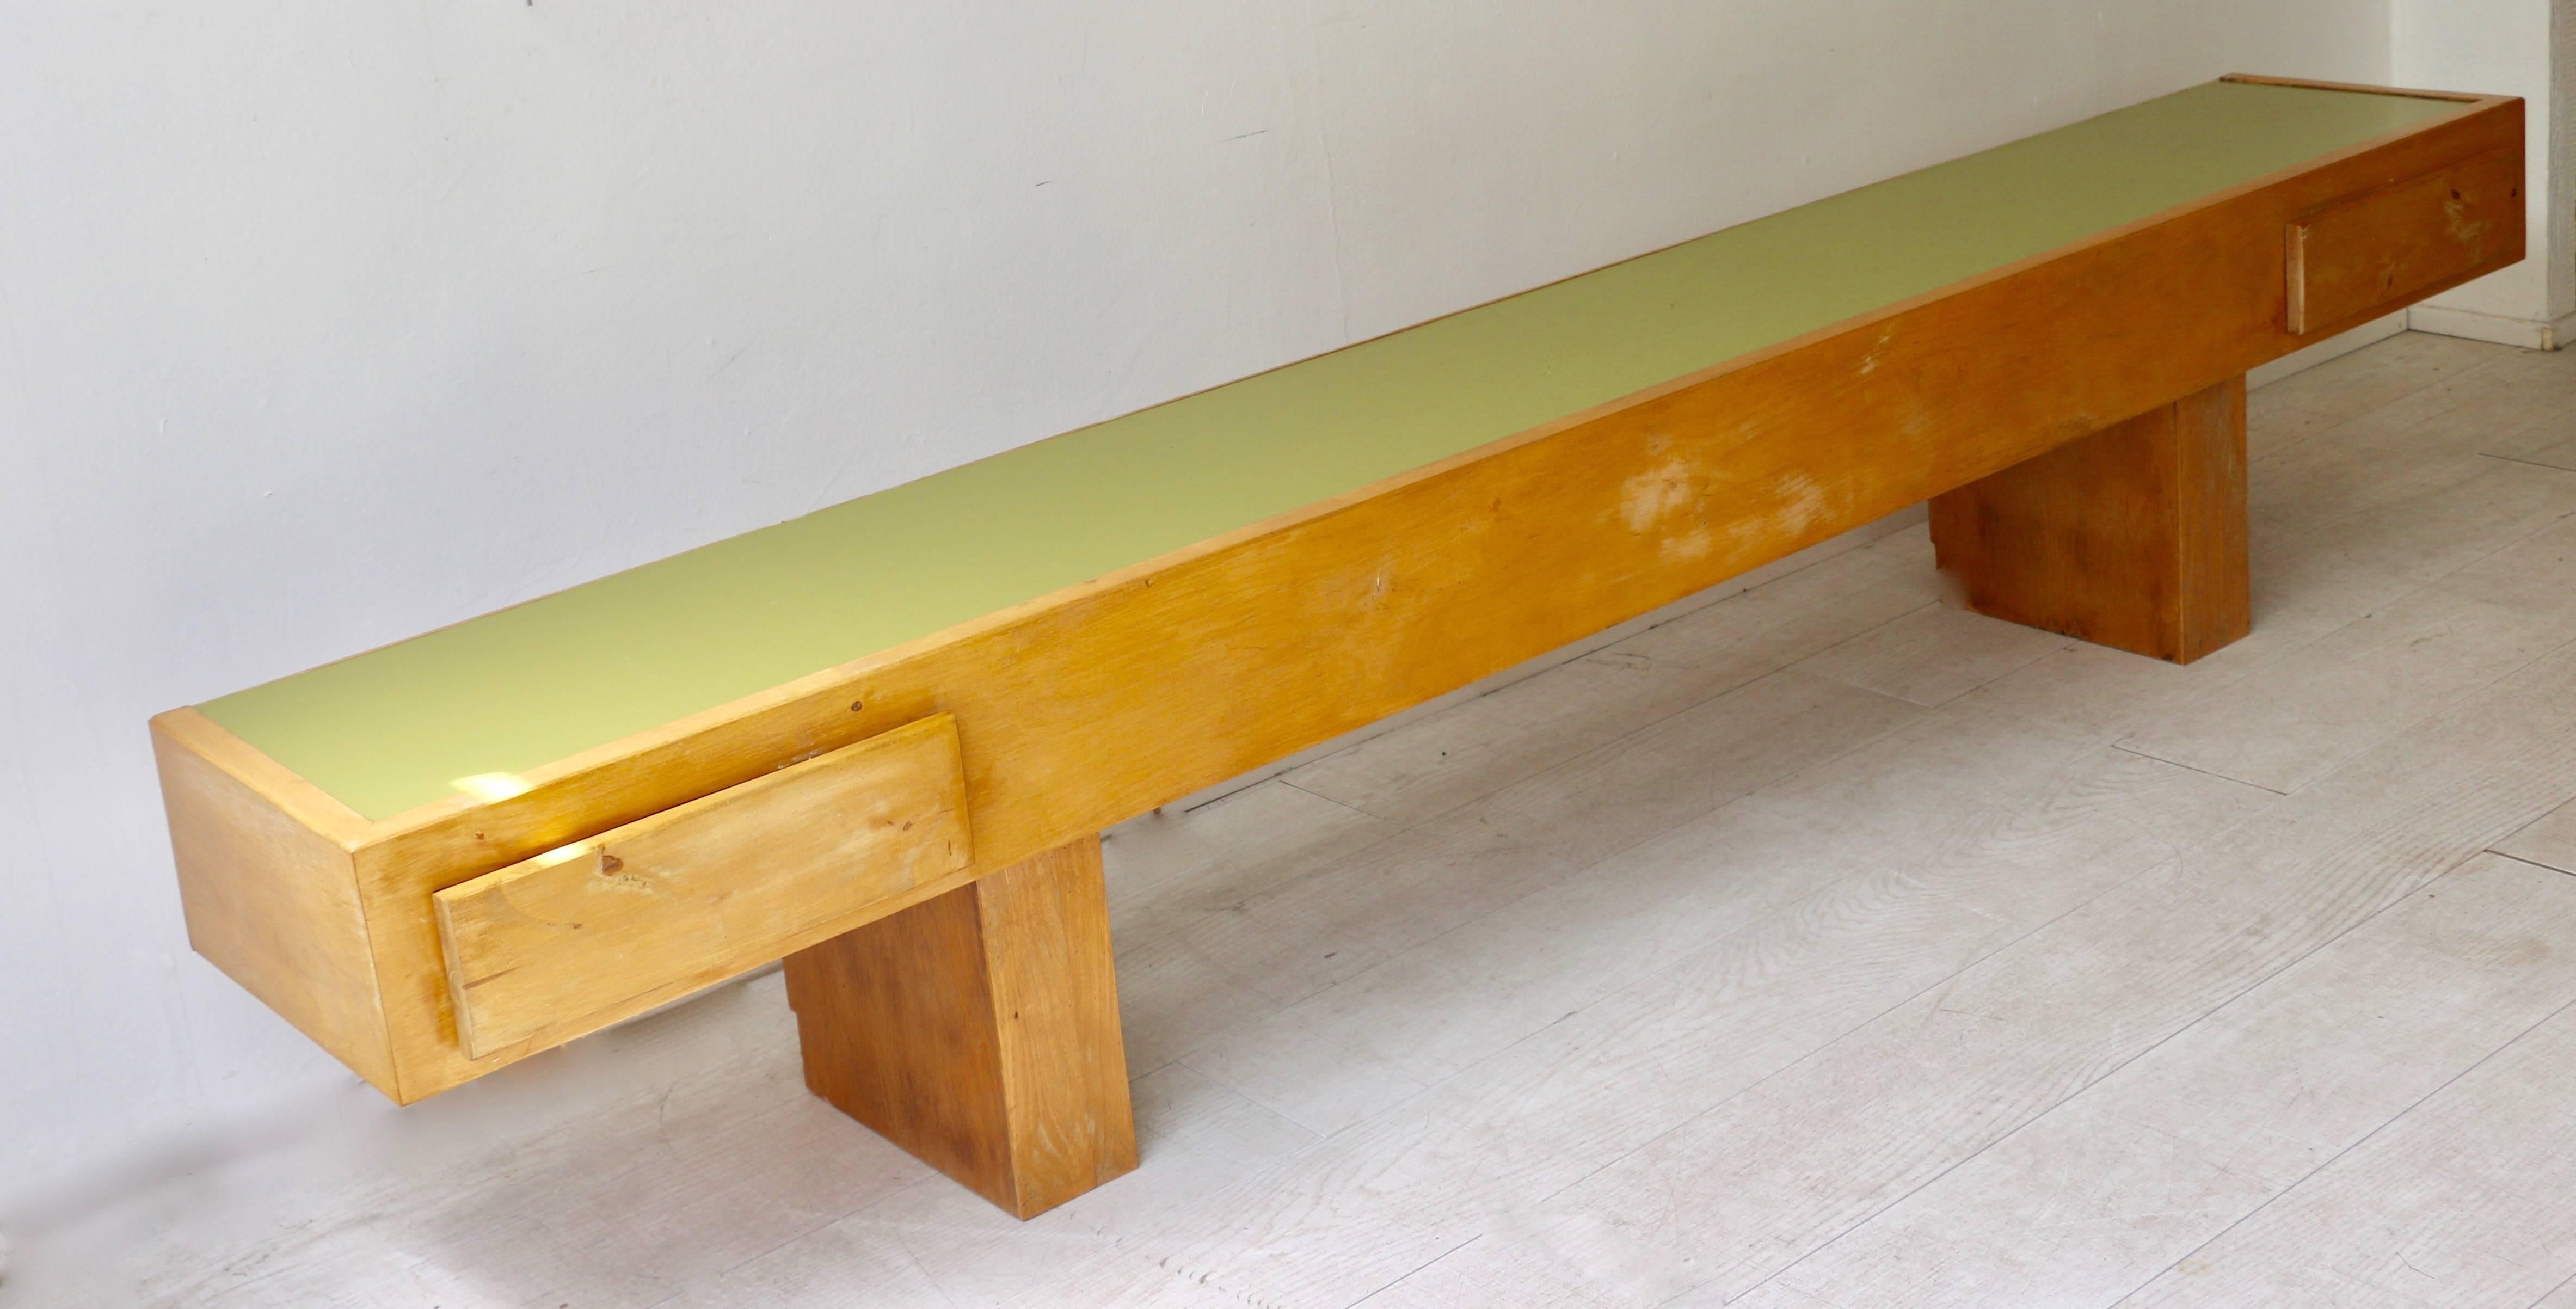 1960s Jaïme Rora, architect, Spain. Large very low console in light wood with a green formica top.